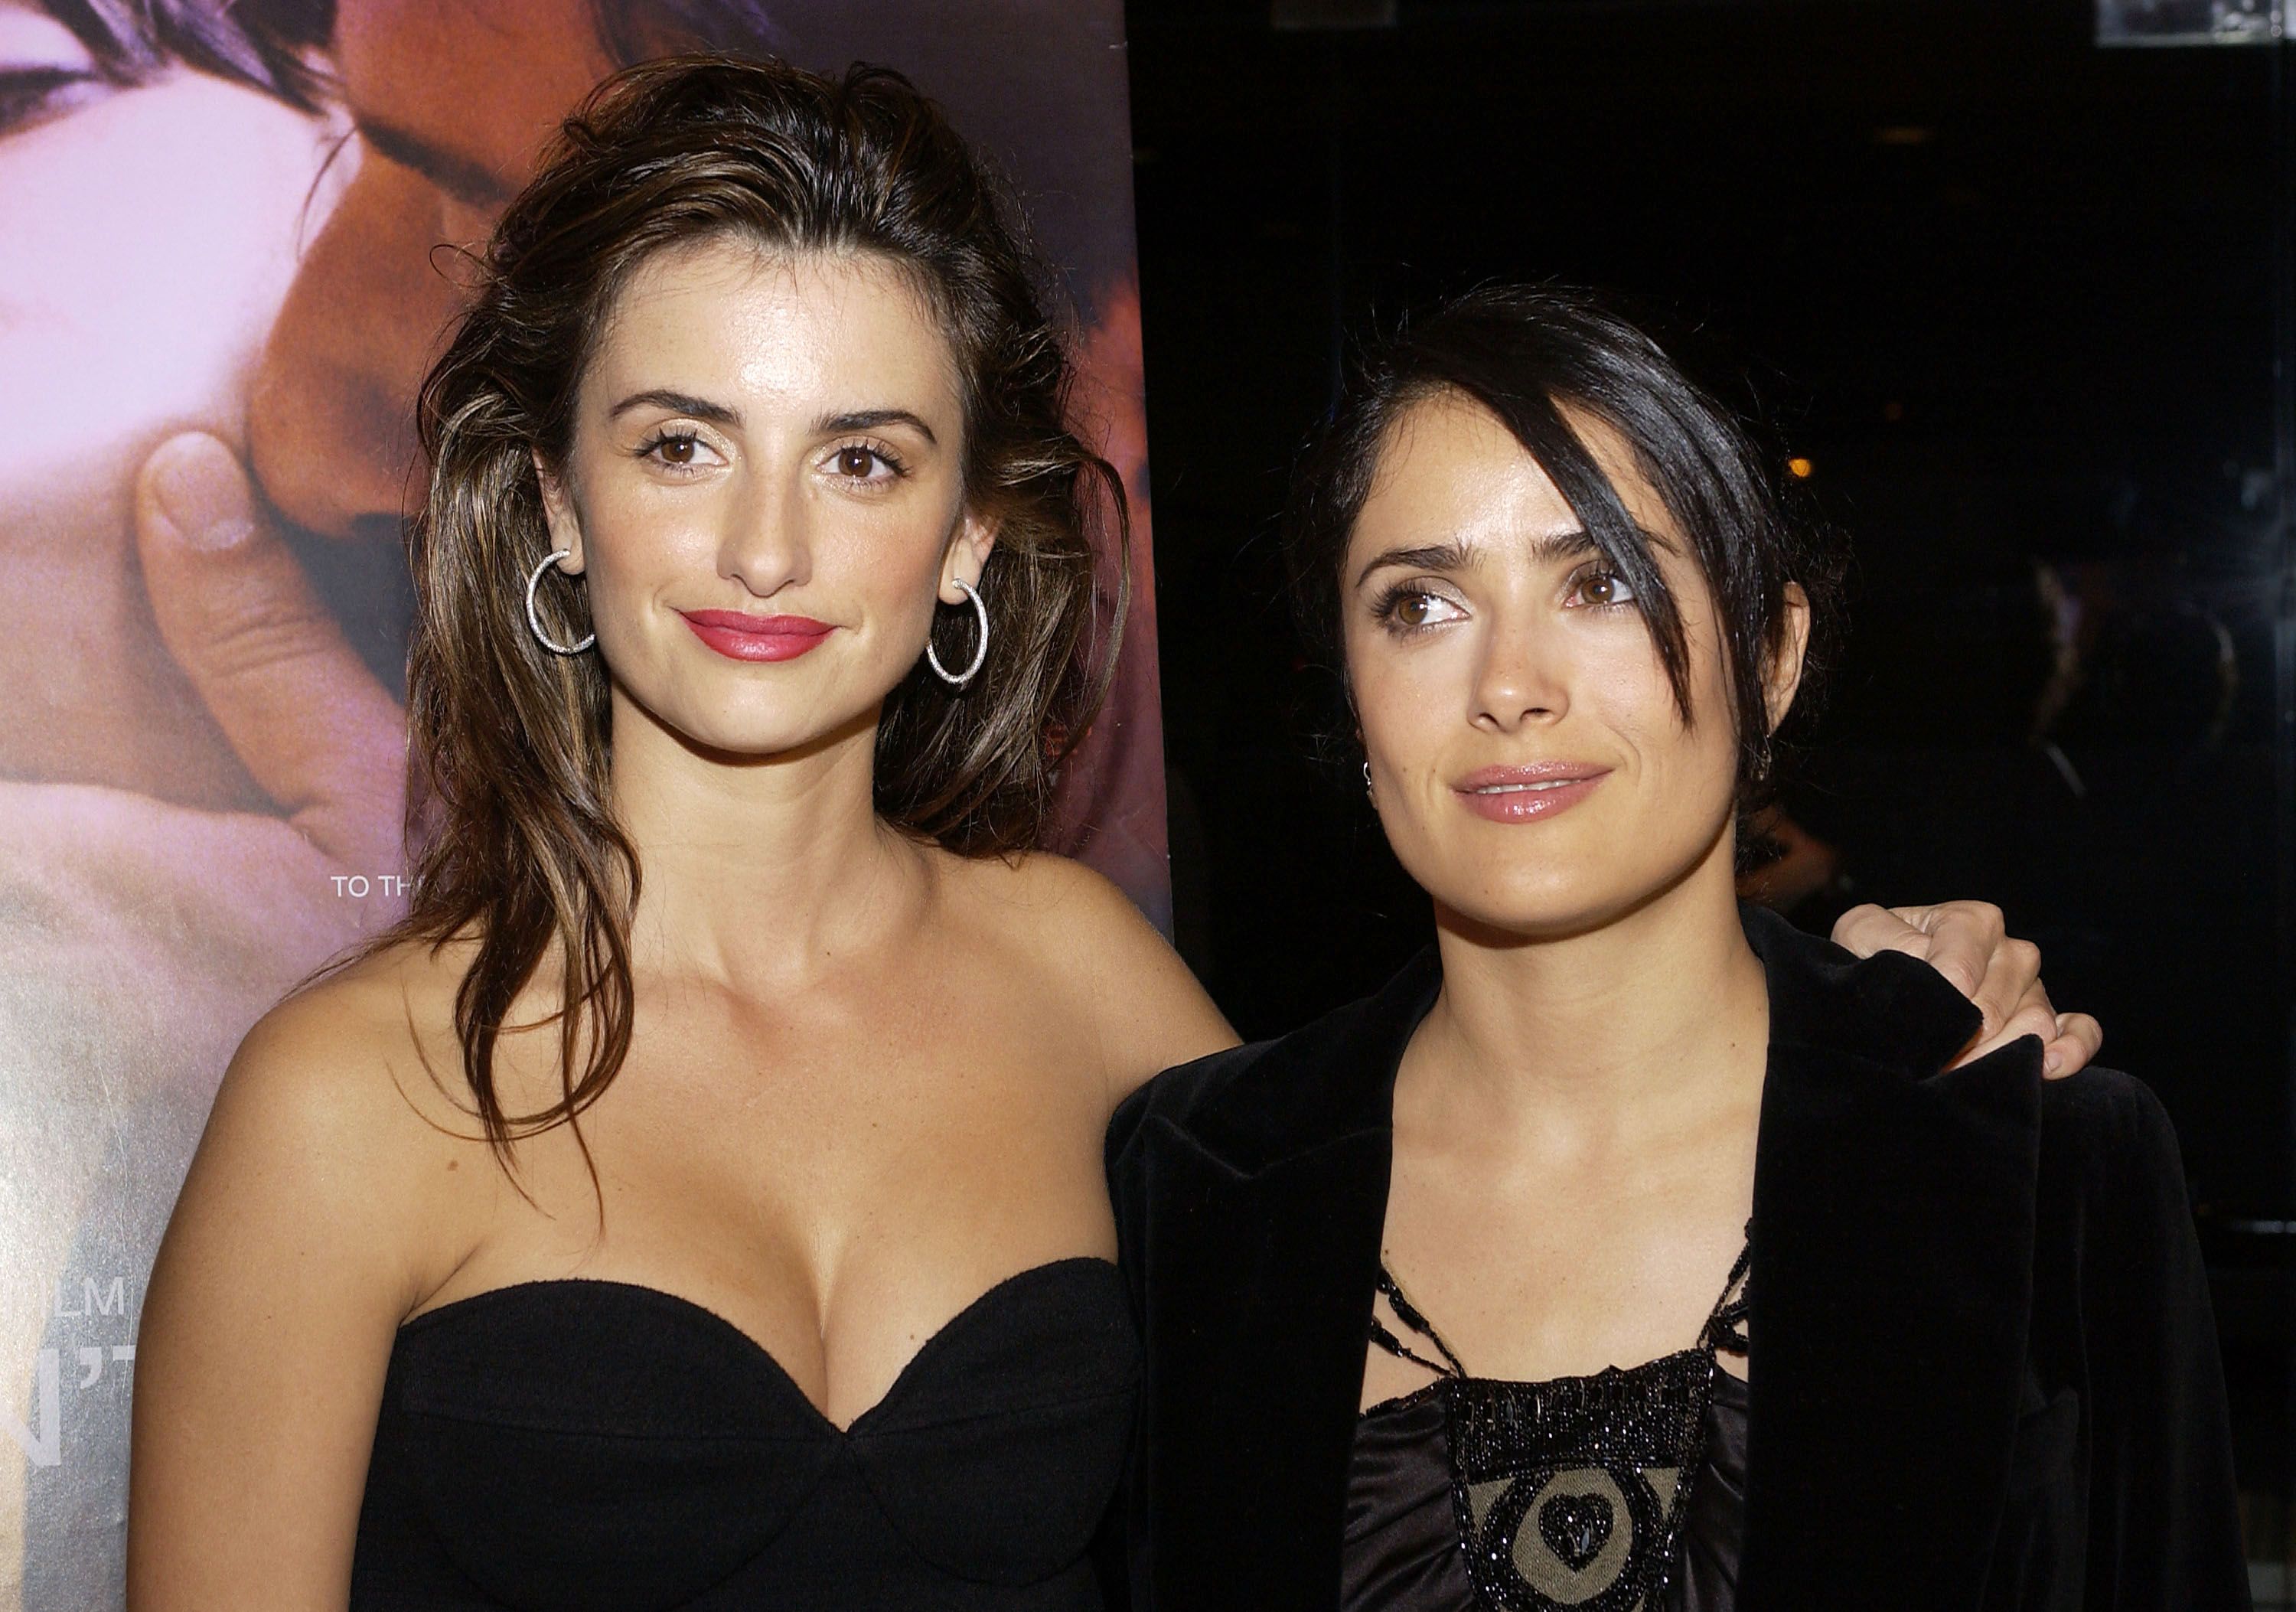 Penelope Cruz and Salma Hayek at a screening of "Don't Move" on March 13, 2005 | Photo: Getty Images